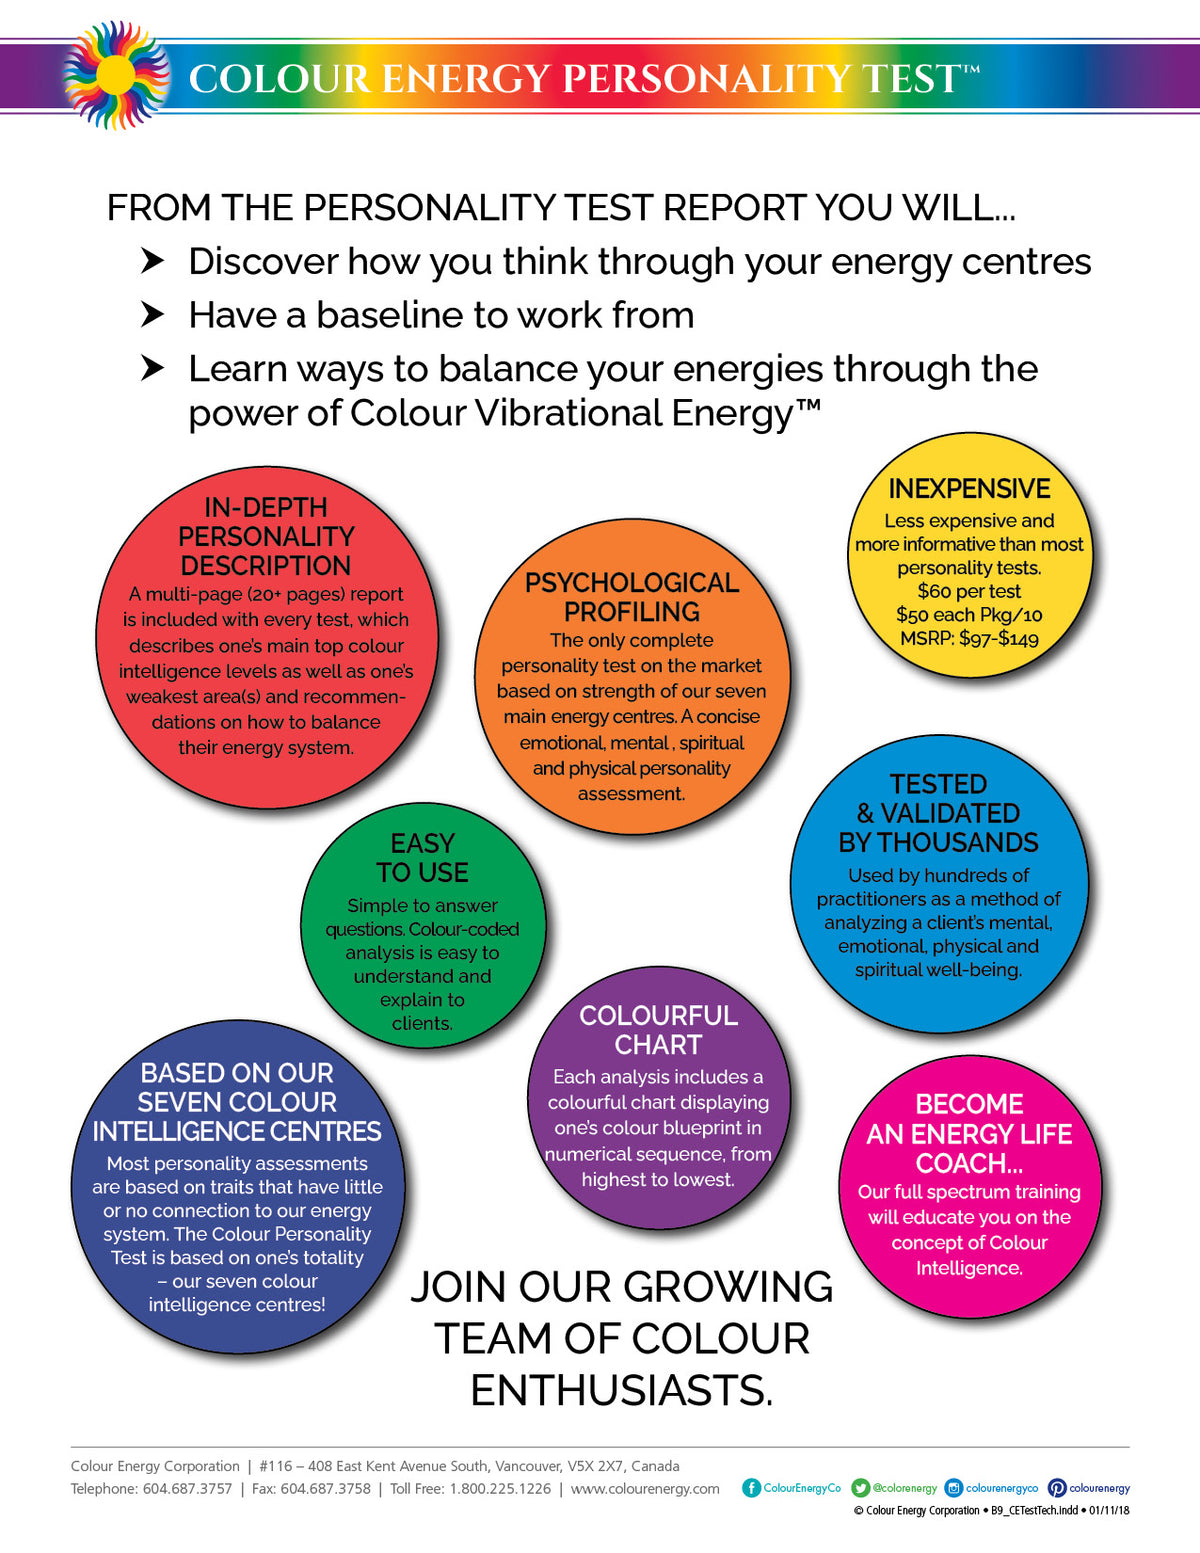 Colour Energy Personality Tests